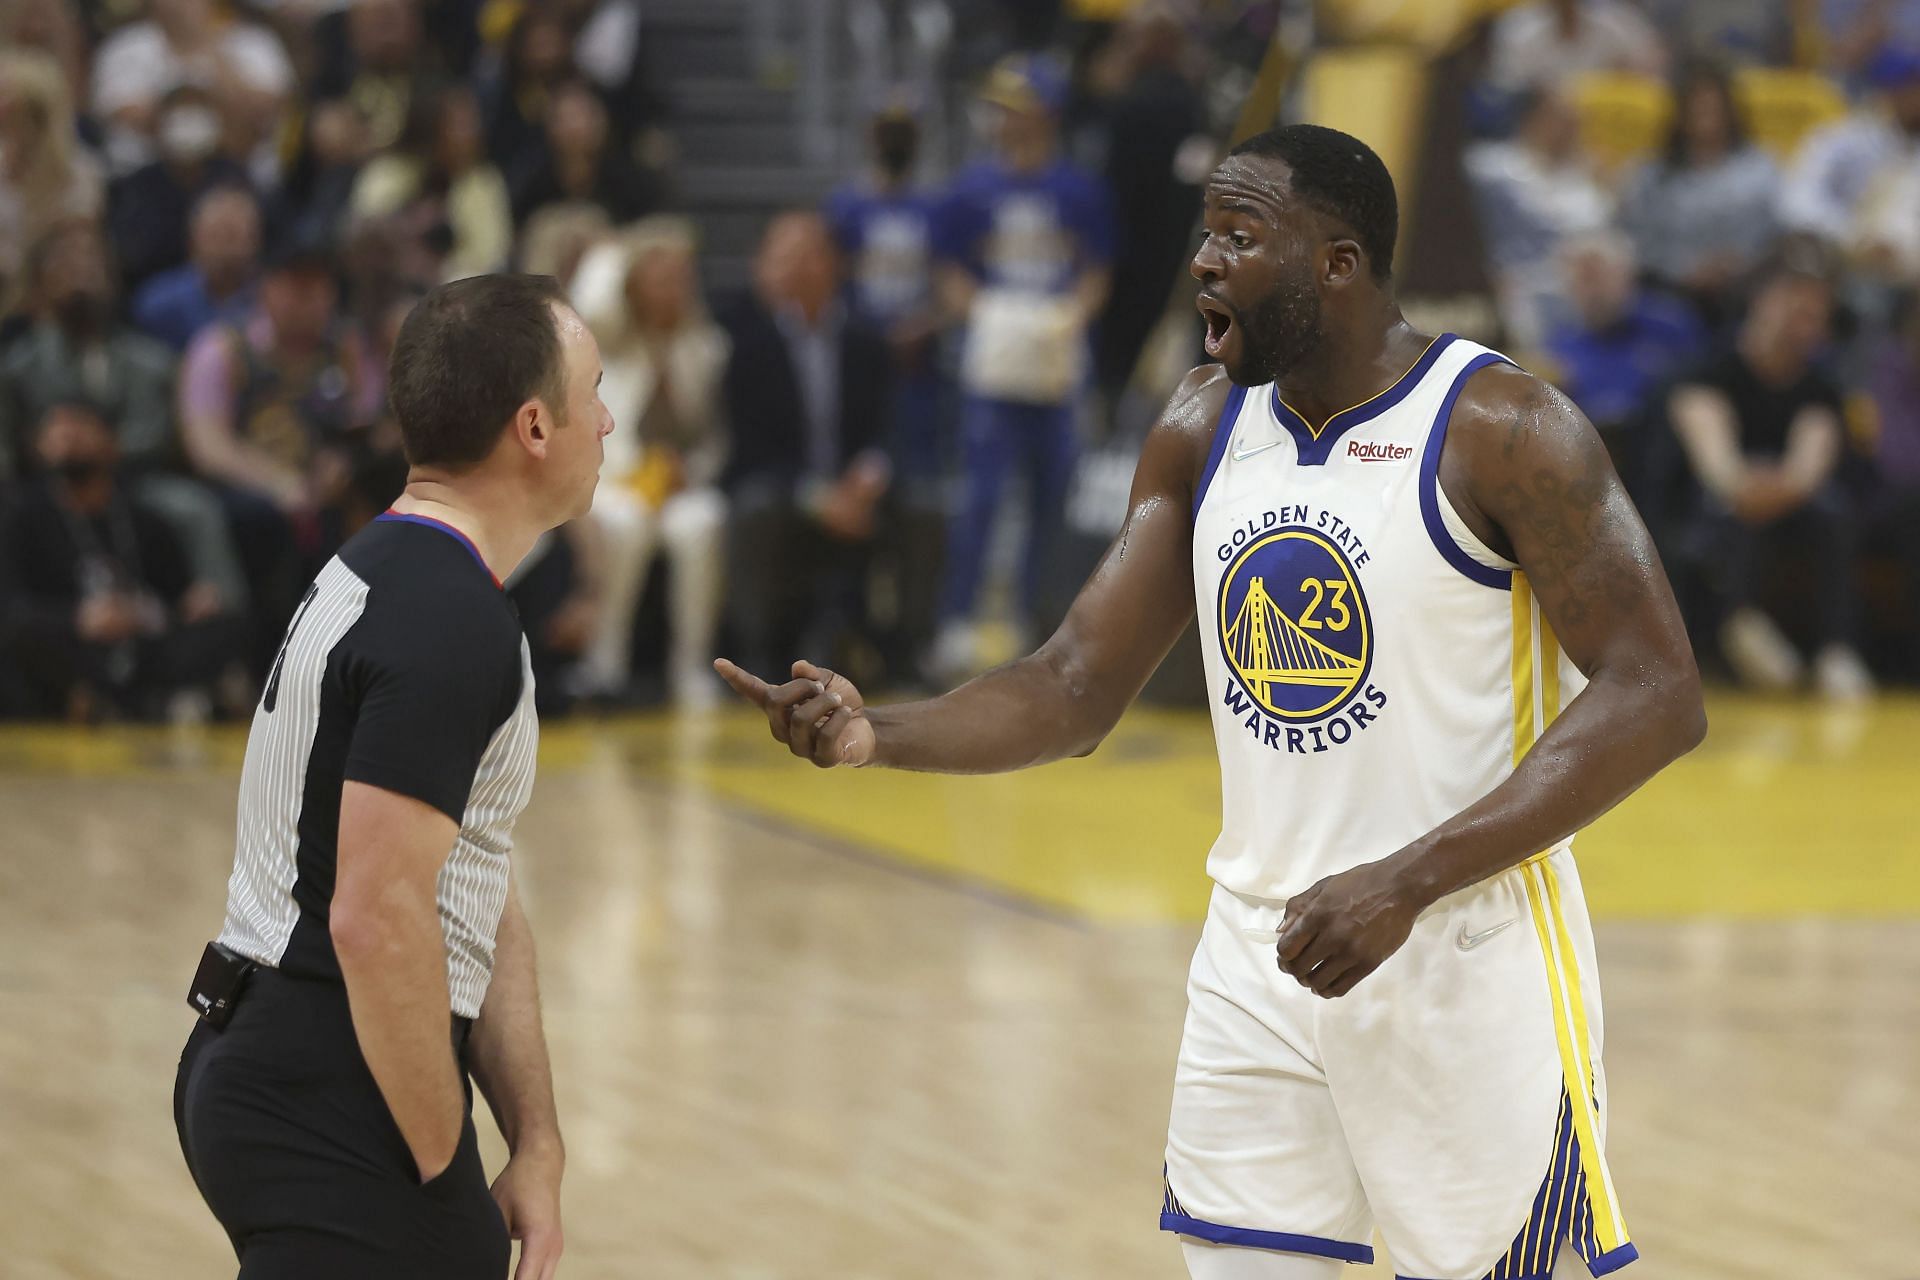 Draymond Green had more energy arguing with the referees than jostling with Robert Williams and guarding Jaylen Brown. [Photo: MassLive]